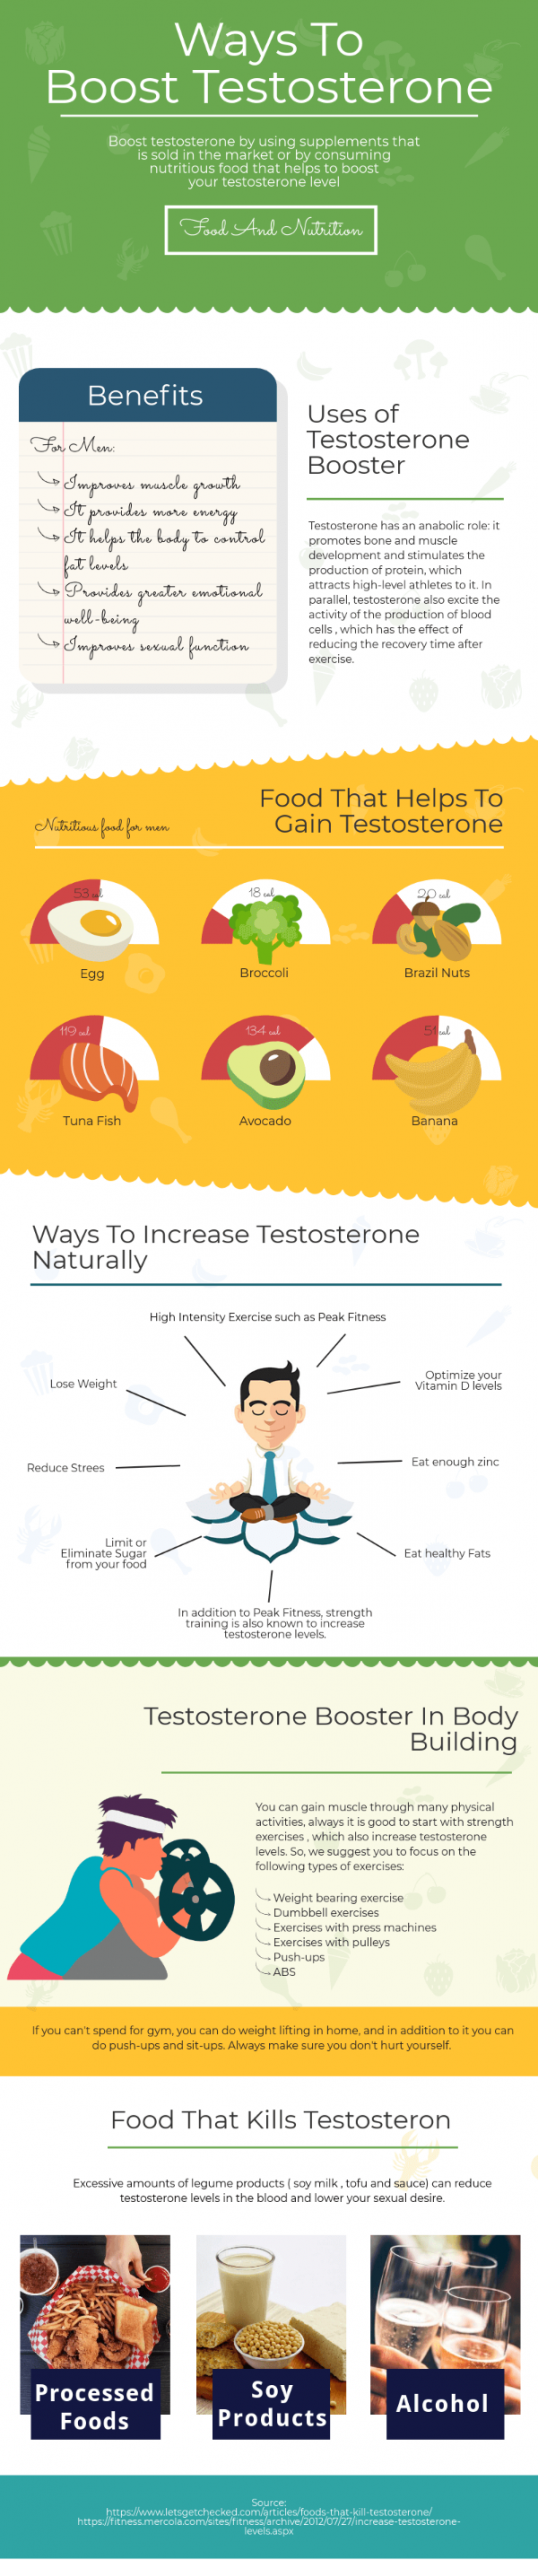 Importance Of Testosterone: What is it? Role & Effect on Body? Hormone Level? How to stimulate the production naturally?